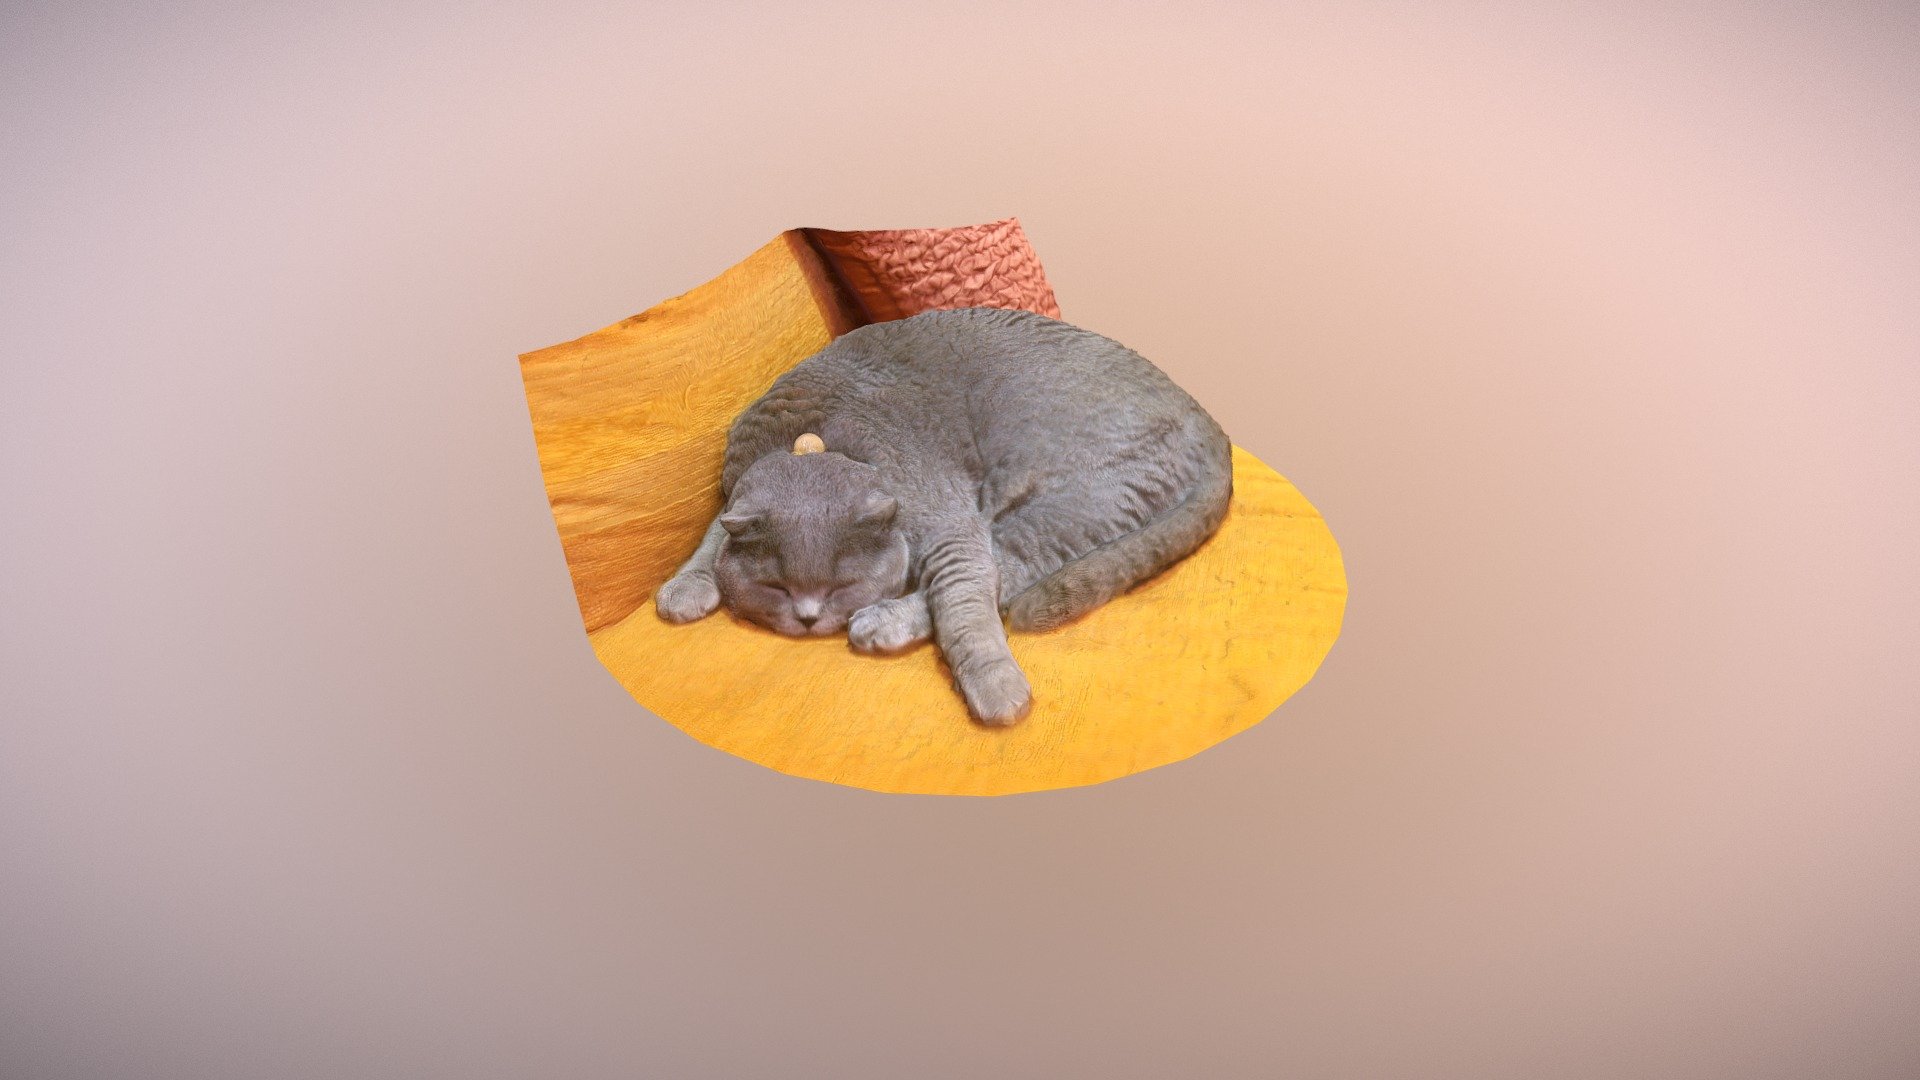 Testing a 3D scan on my sleeping cat. Usually a rig is needed for living subjects, but in this case he was comparable to a still life scene!

Scanned with an S7 smartphone and processed in 3DF Zephyr Free 3d model